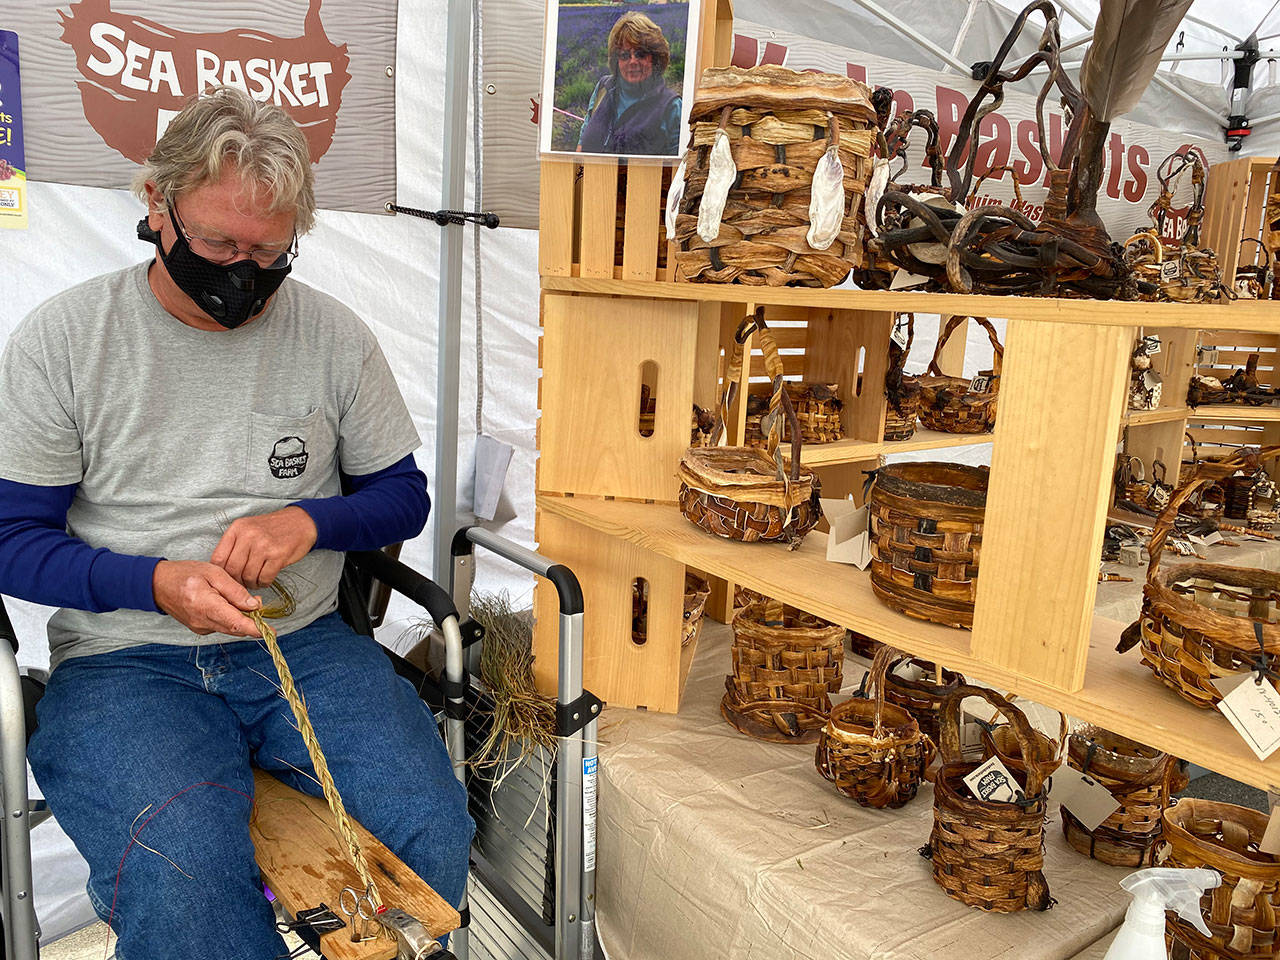 Greg Gundy of Sea Basket Farm is busy at work this past weekend at the Sequim Farmers & Artisans Market. Photo by Emma Jane Garcia